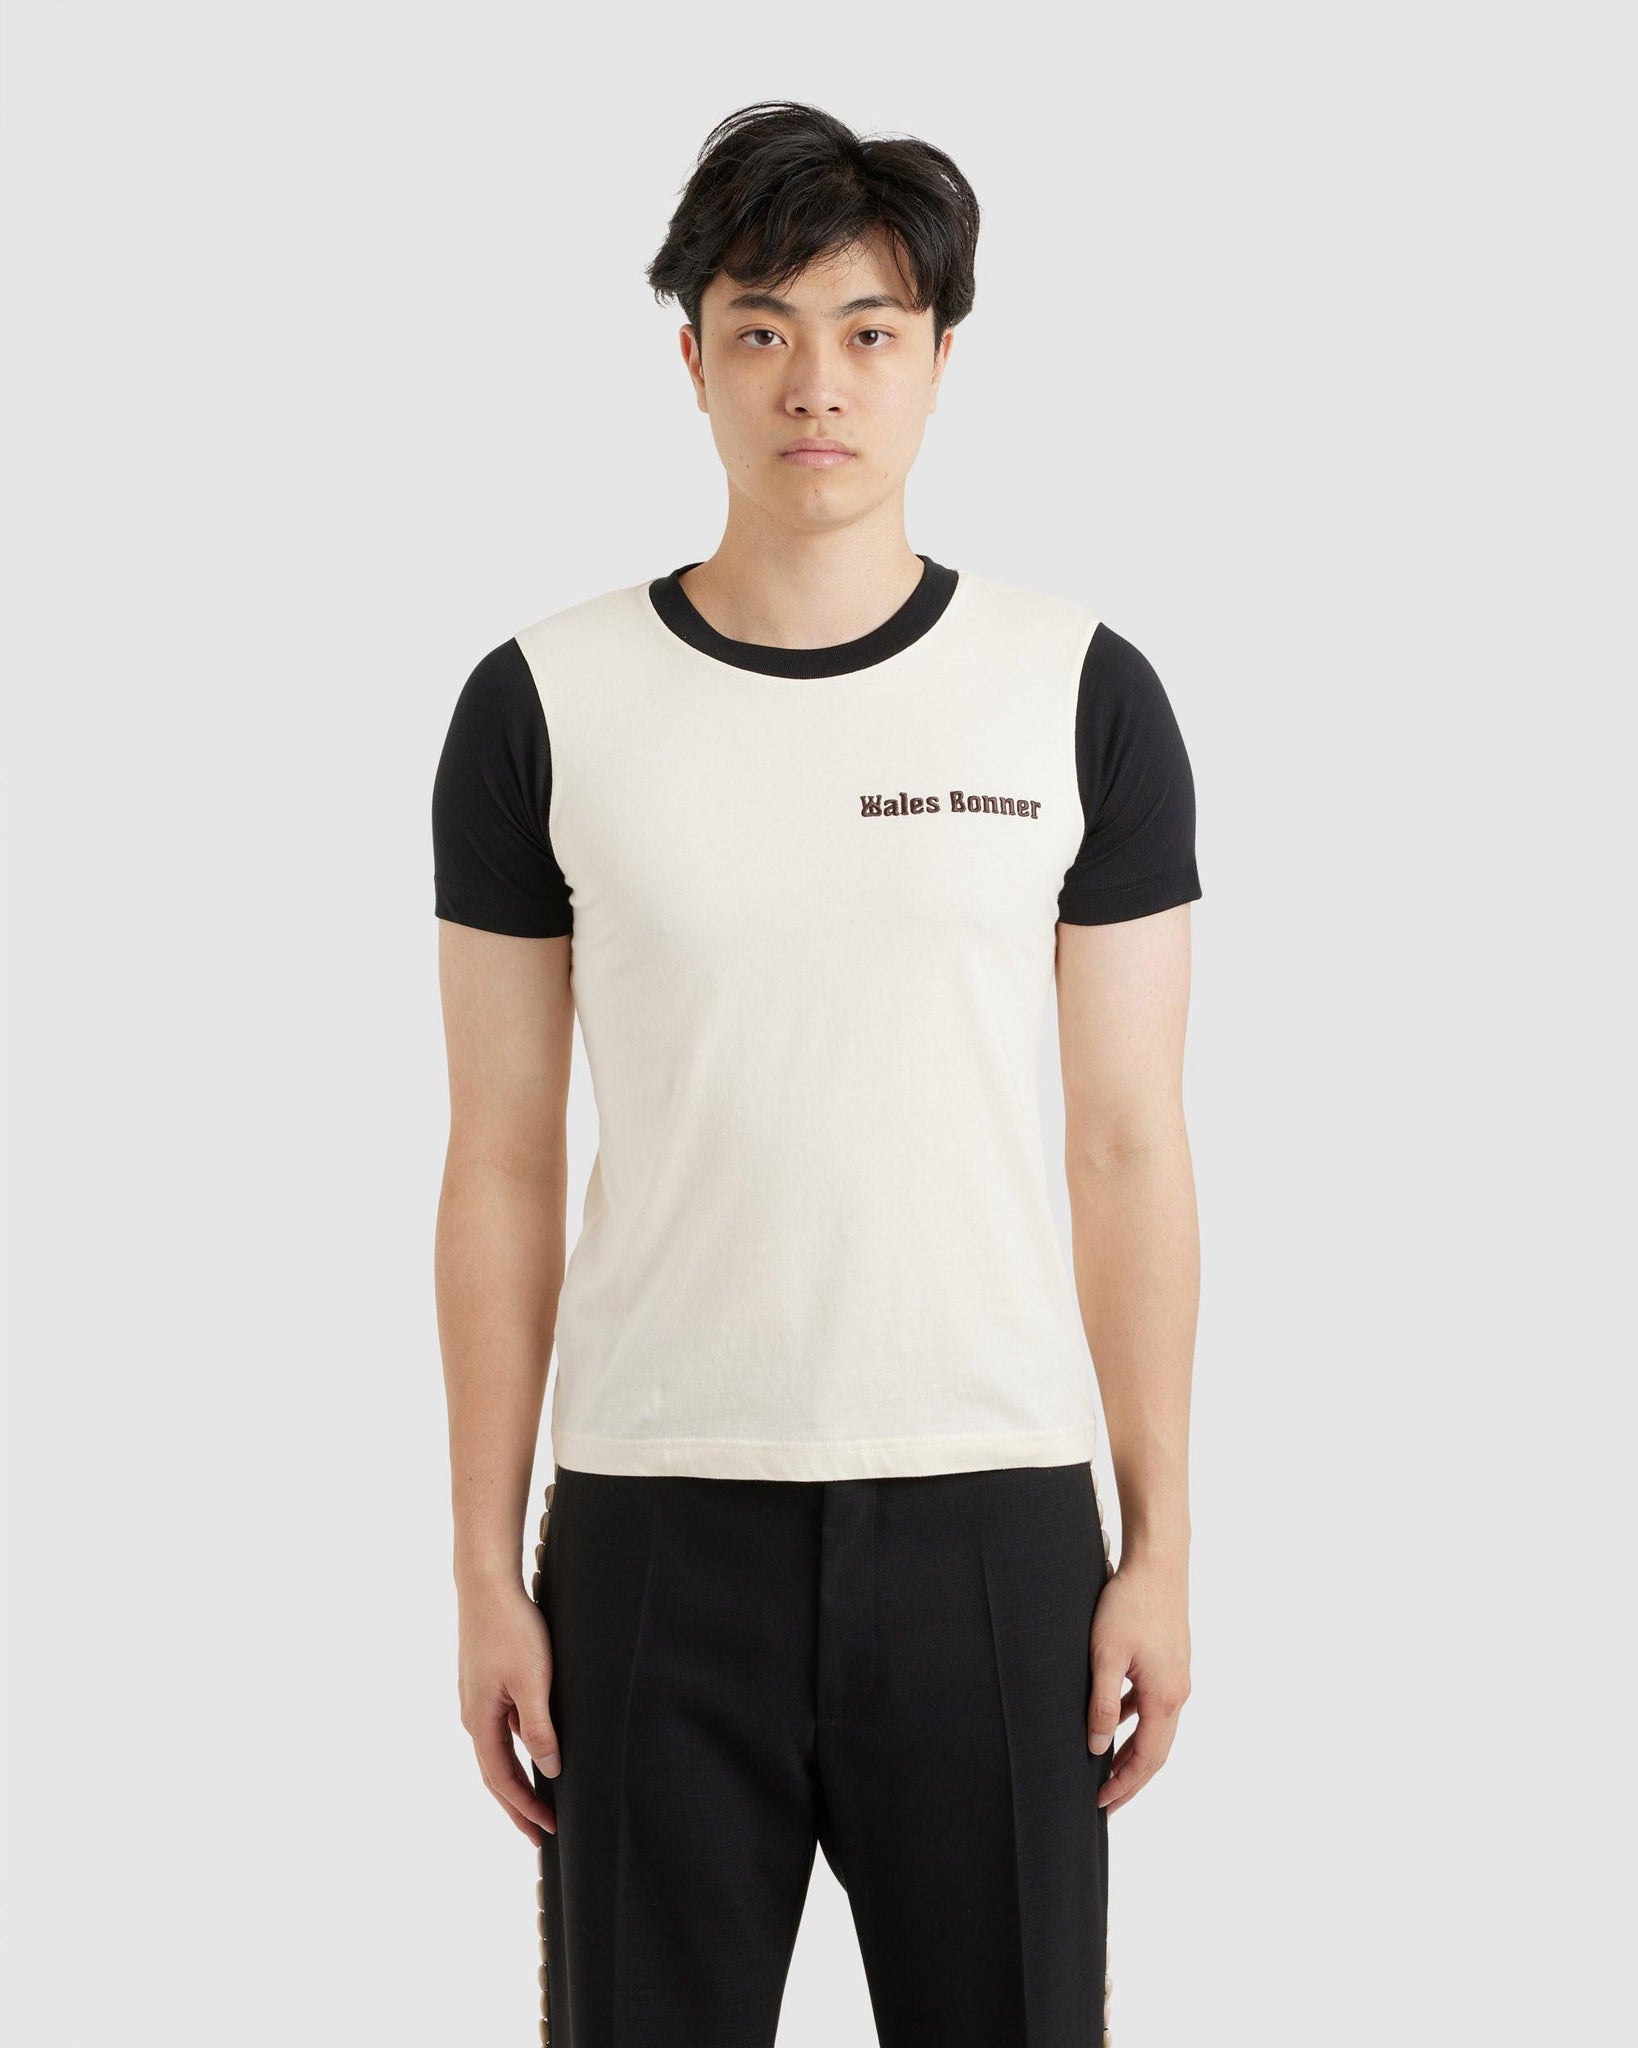 Morning Tee Black/Ivory - {{ collection.title }} - Chinatown Country Club 